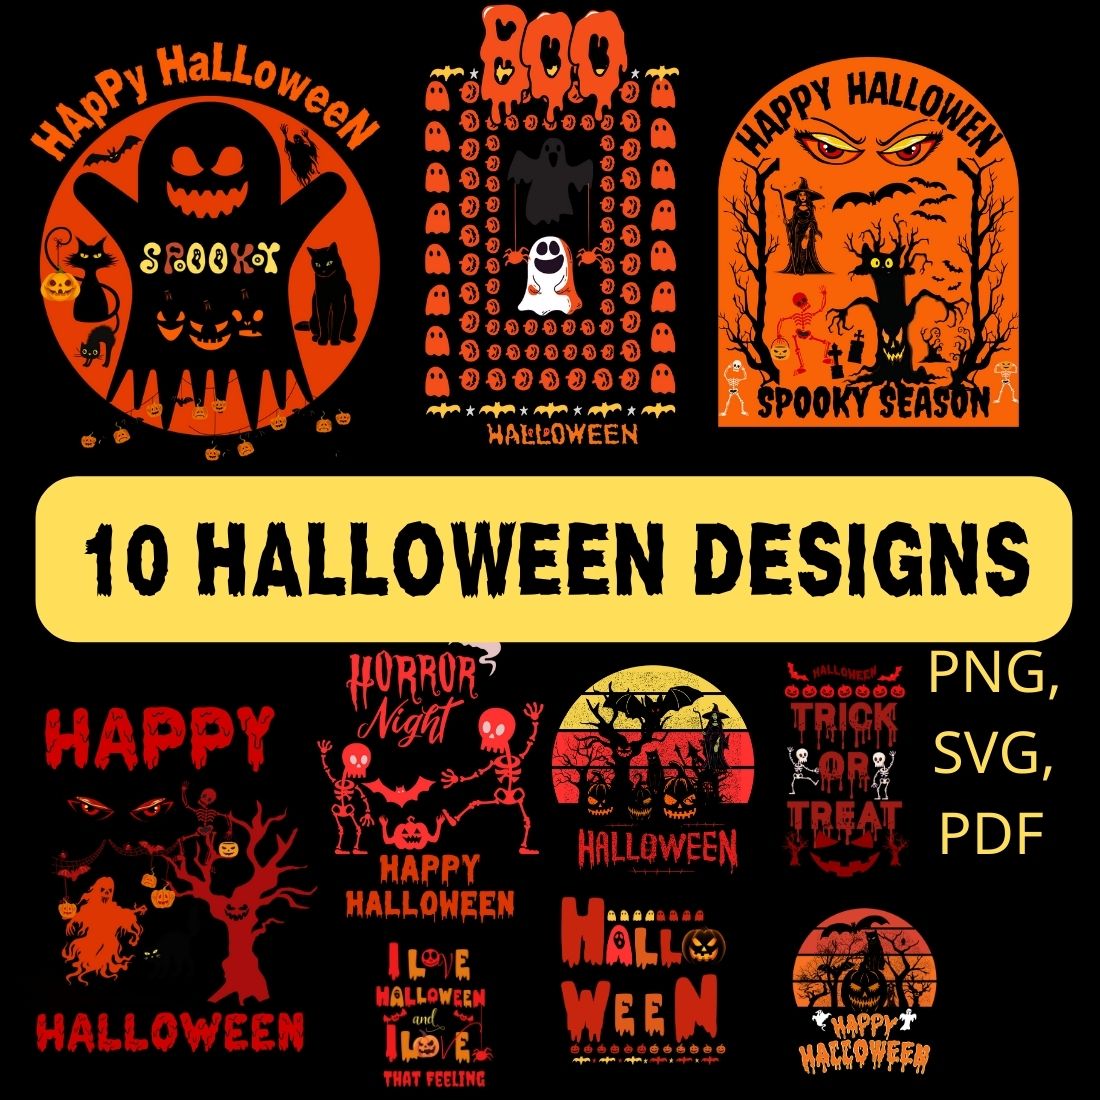 10 Halloween Designs cover image.